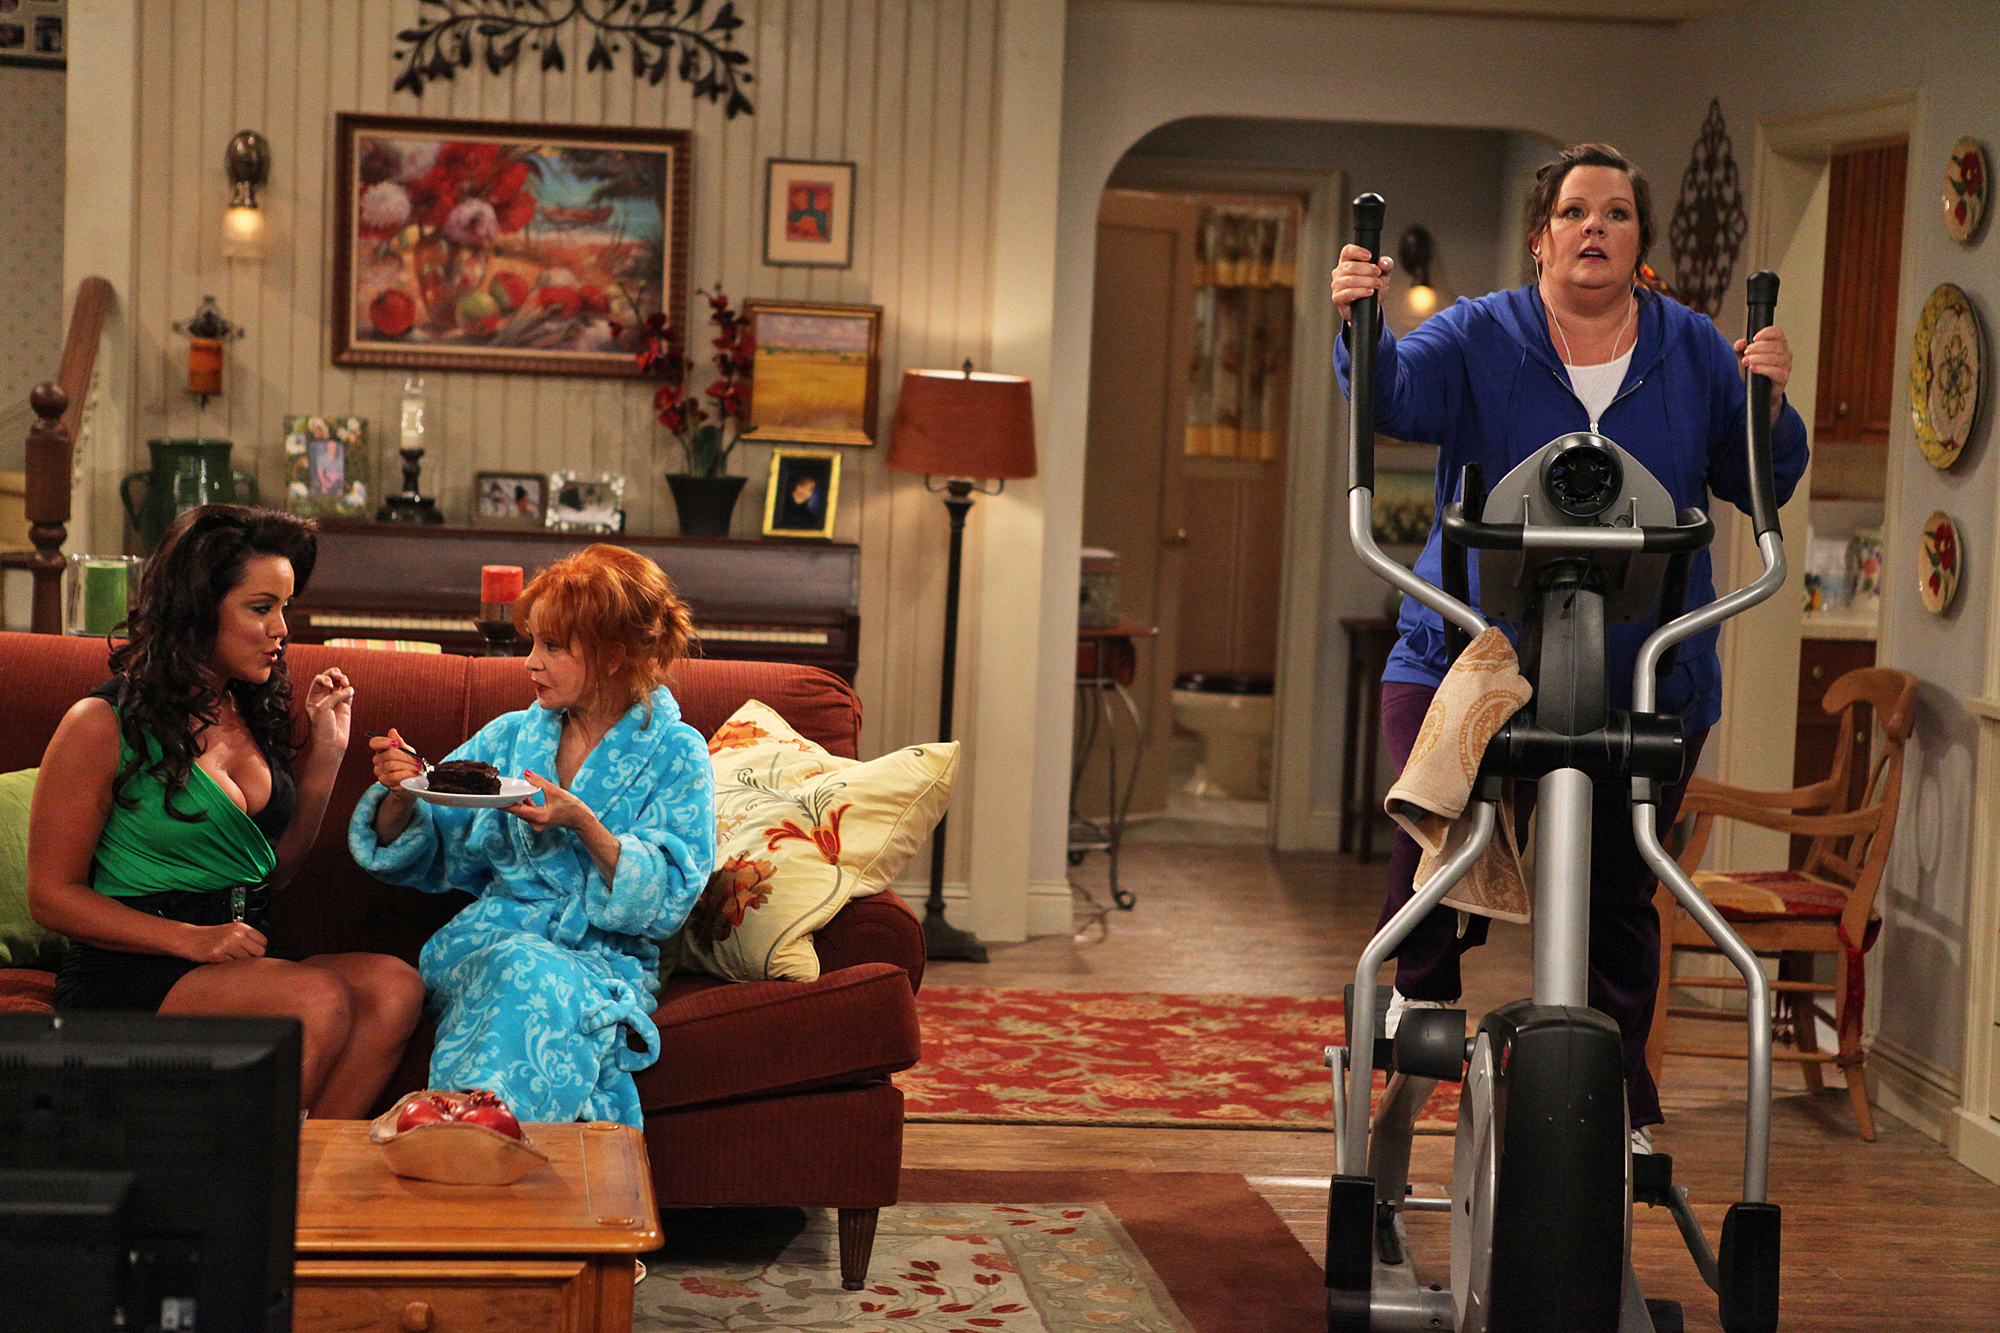 Katy Mixon, Swoozie Kurtz, and Melissa McCarthy on an episode of "Mike & Molly" on November 23, 2009 | Source: Getty Images